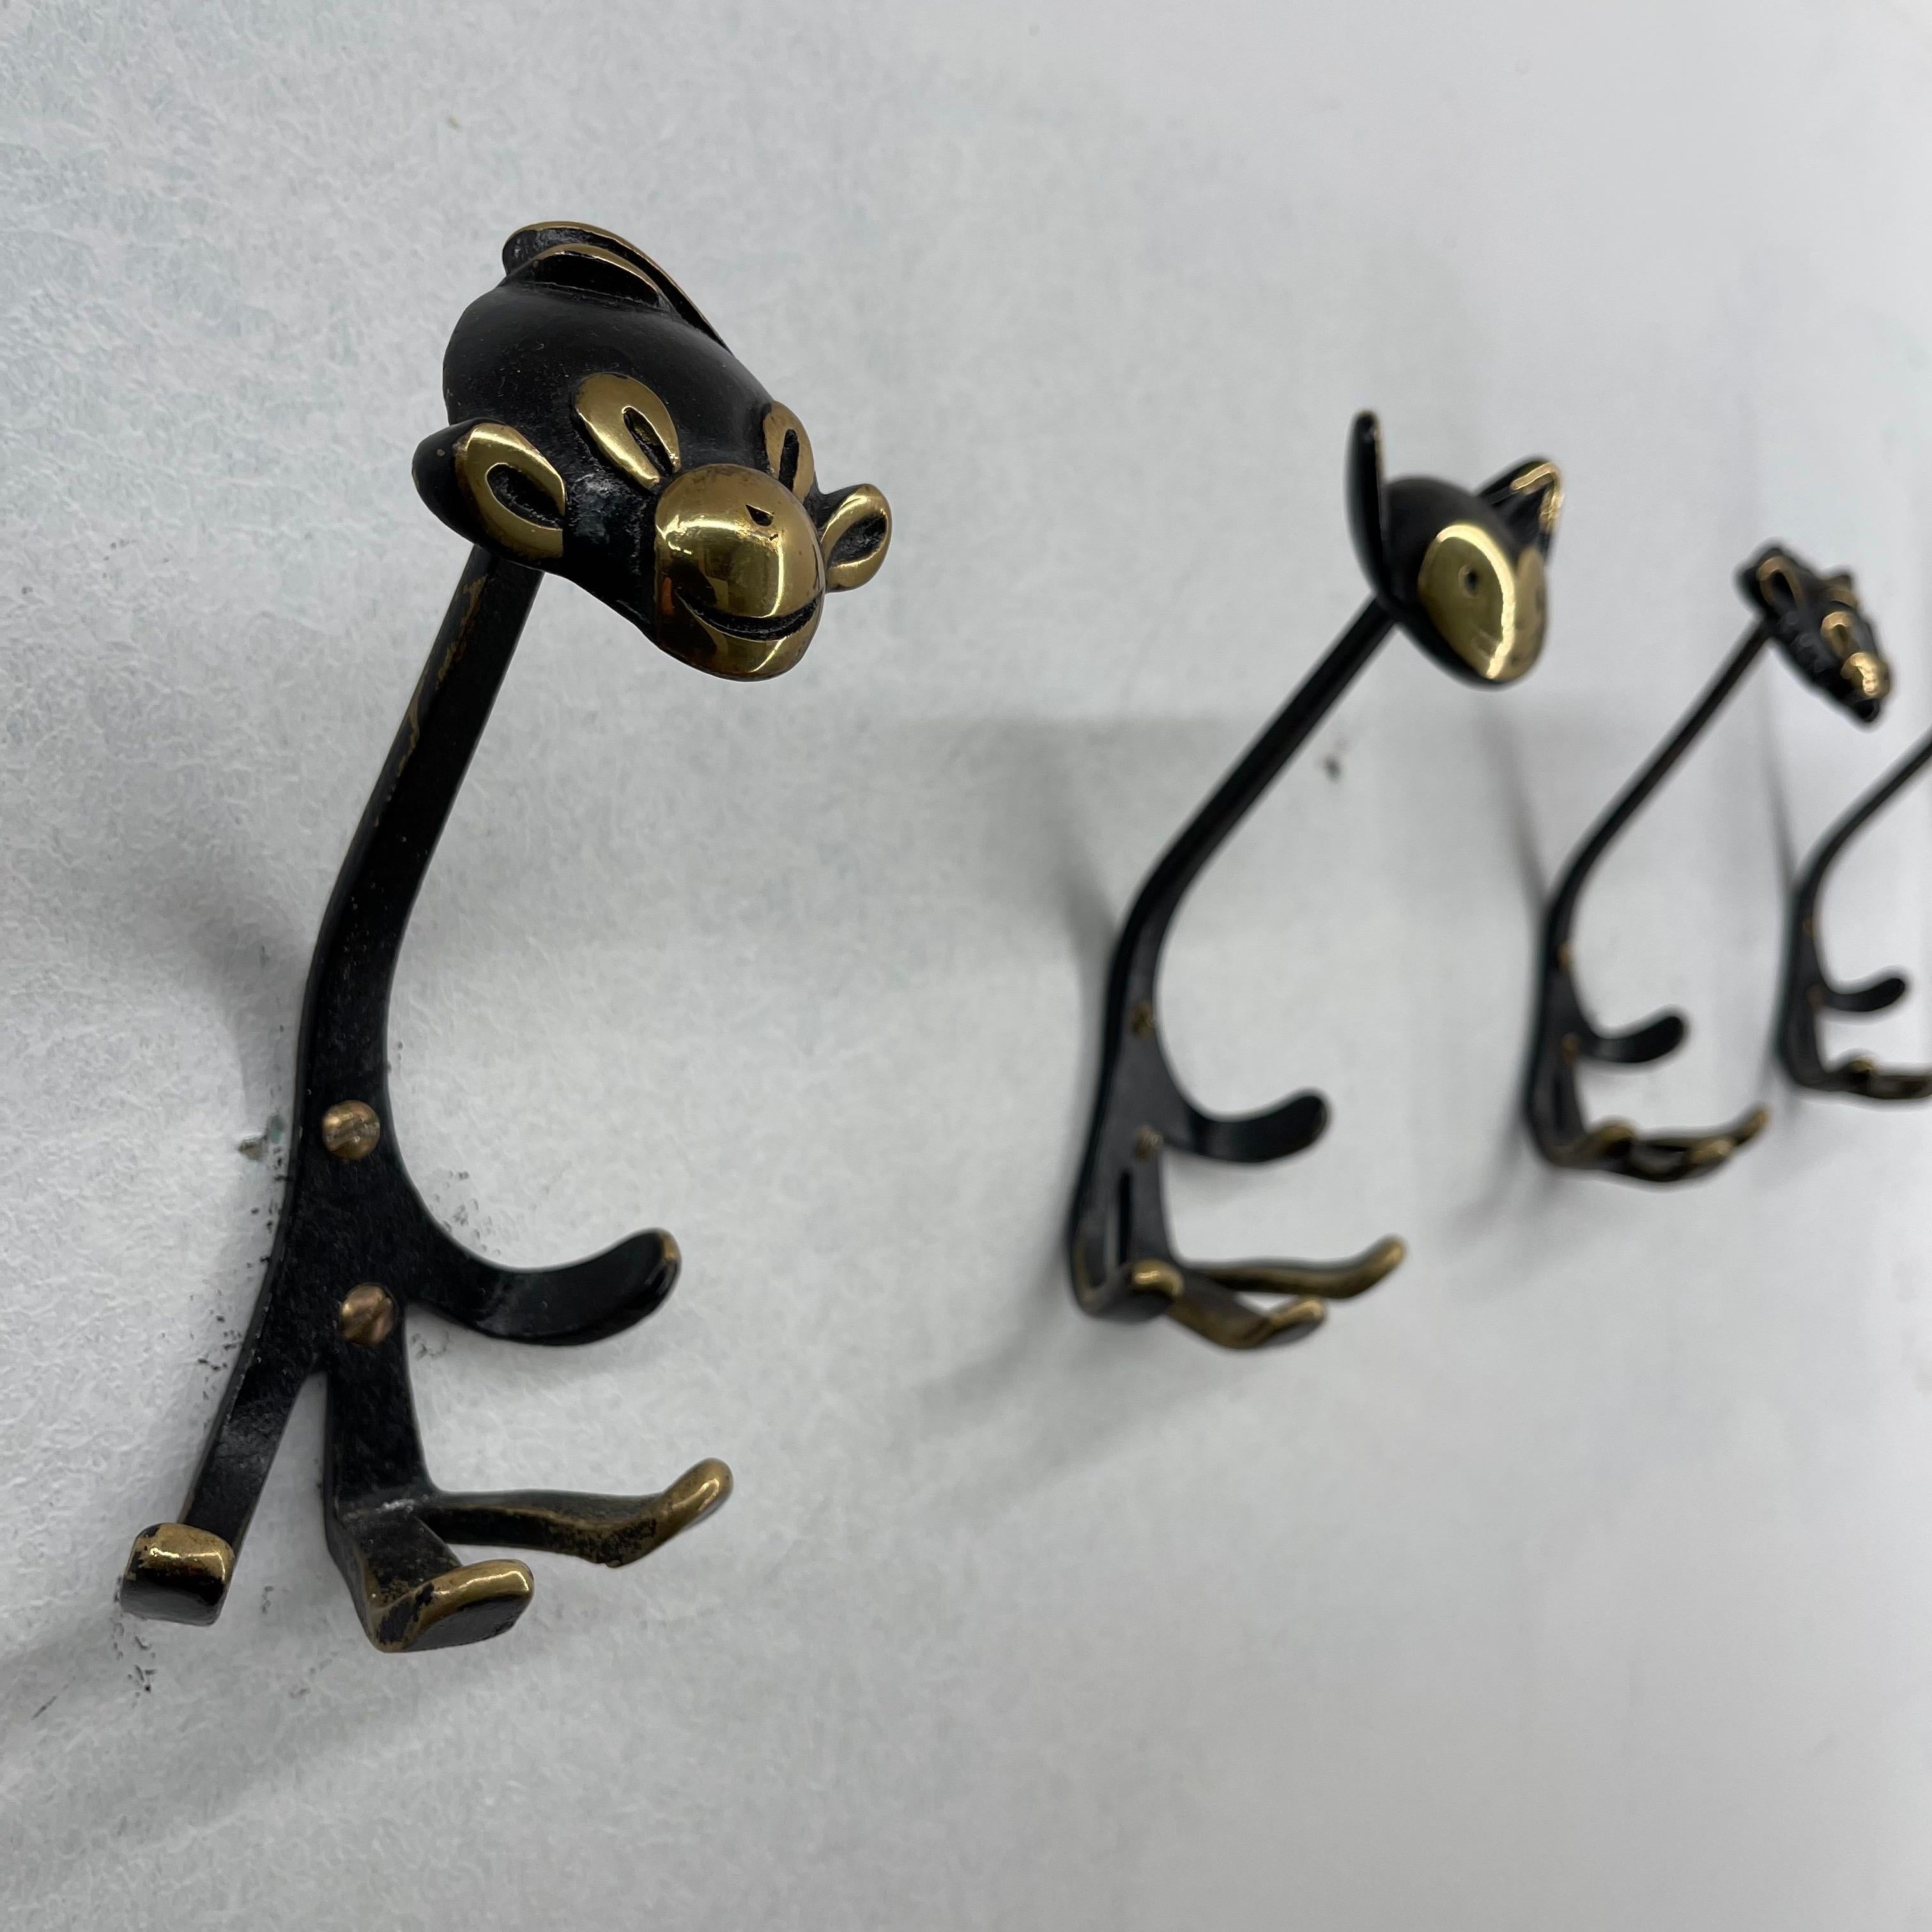 Walter Bosse Brass Wall Hooks Model 'Zoo', 6 Pieces Available, Austria 1950s For Sale 7